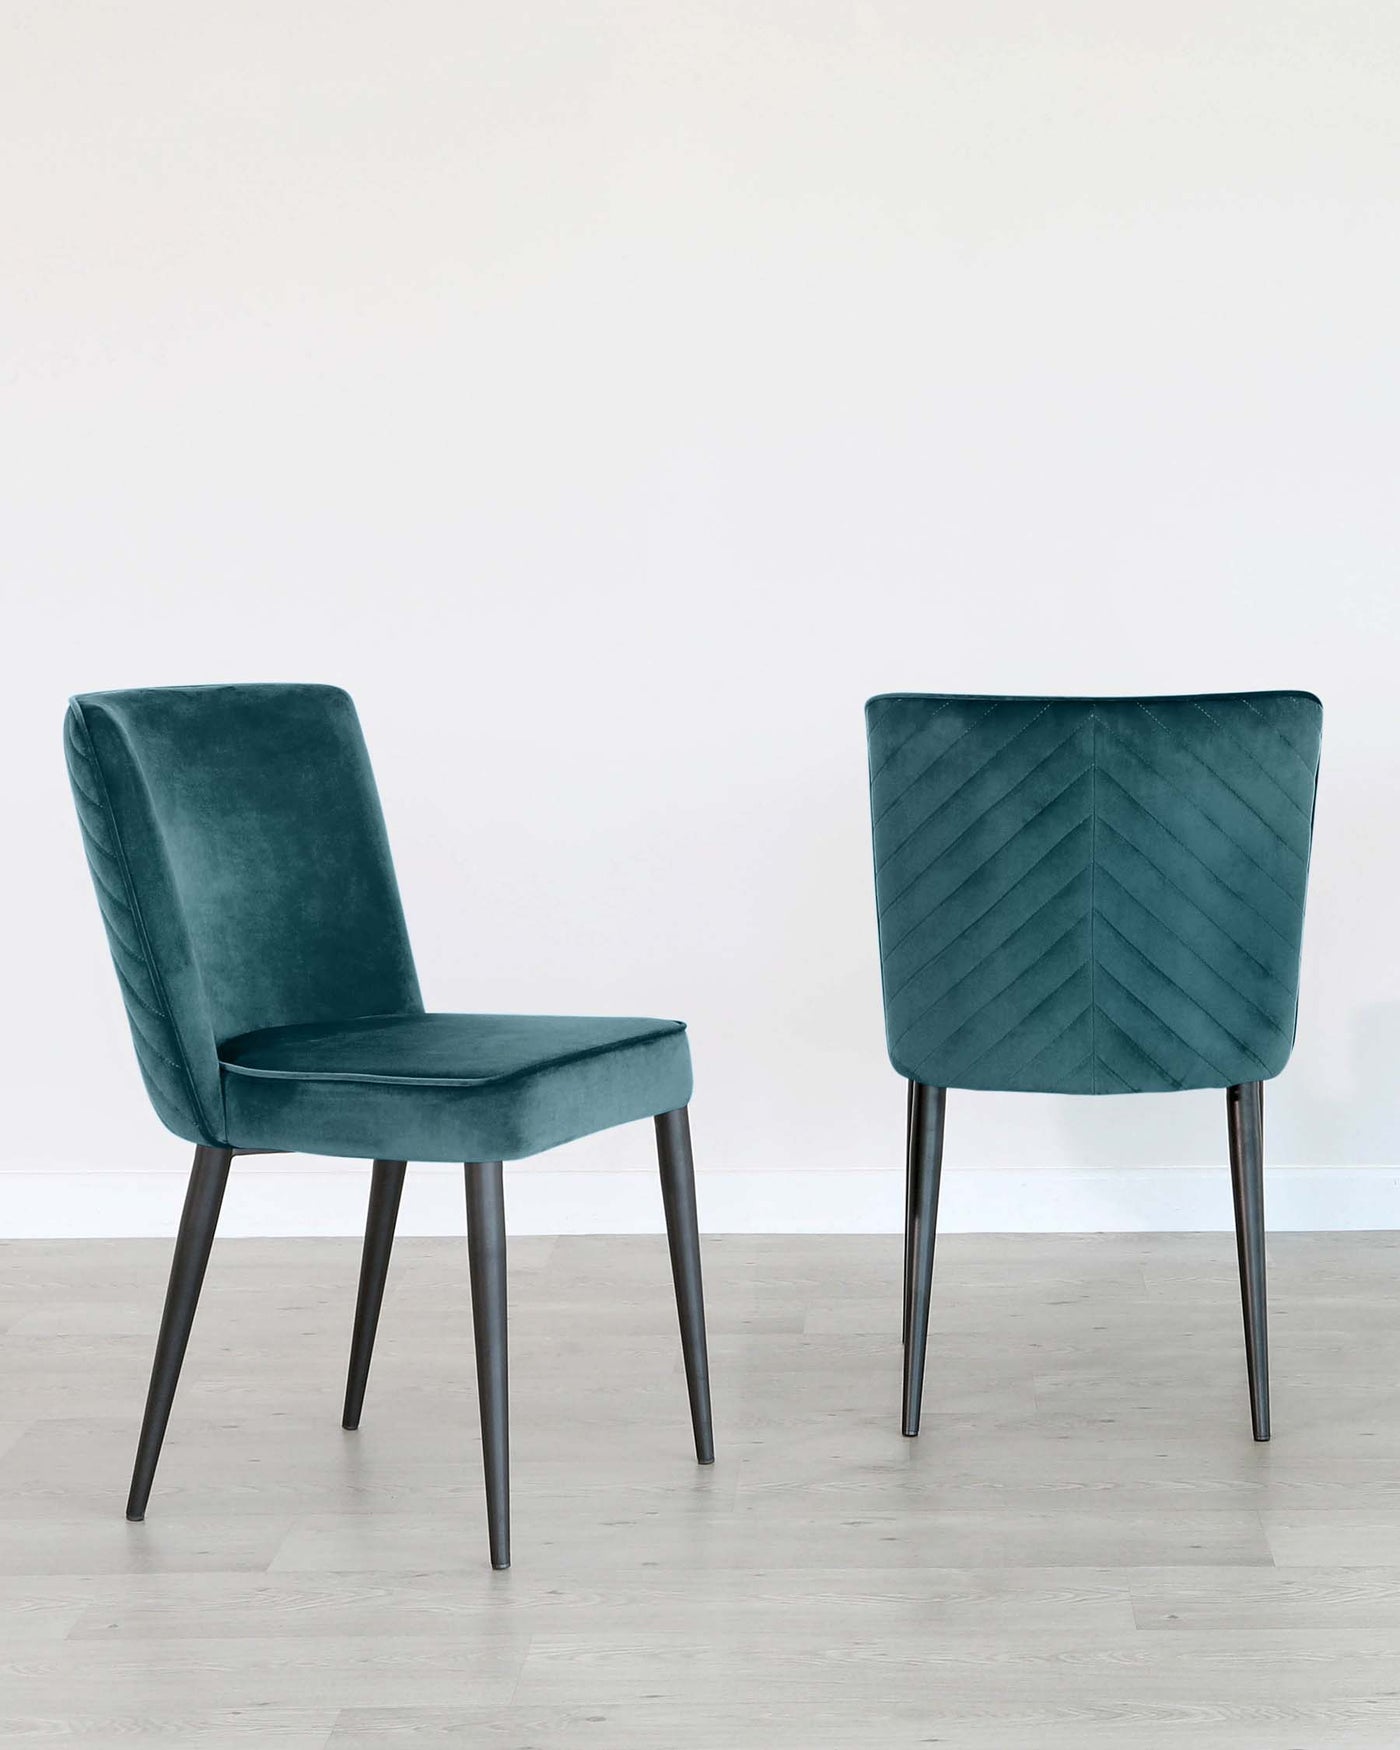 Two modern dining chairs with dark teal velvet upholstery and black metal legs, one featuring a smooth back and the other with a diagonally quilted back design.